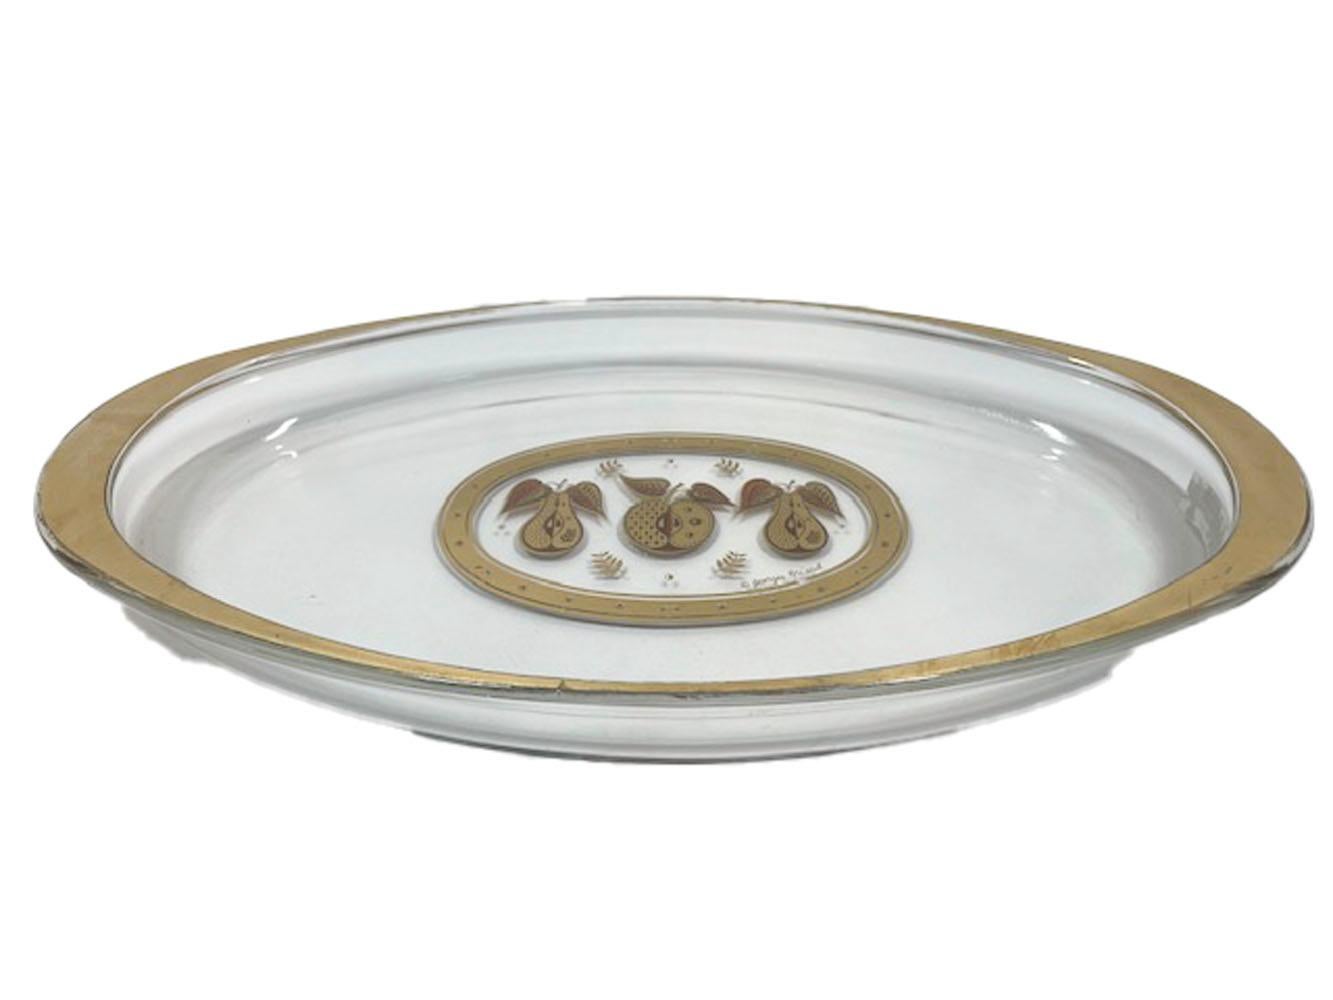 Mid-Century Modern Pyrex glass platter with a Forbidden Fruit design by Georges Briard in 22k gold and orange enamel.